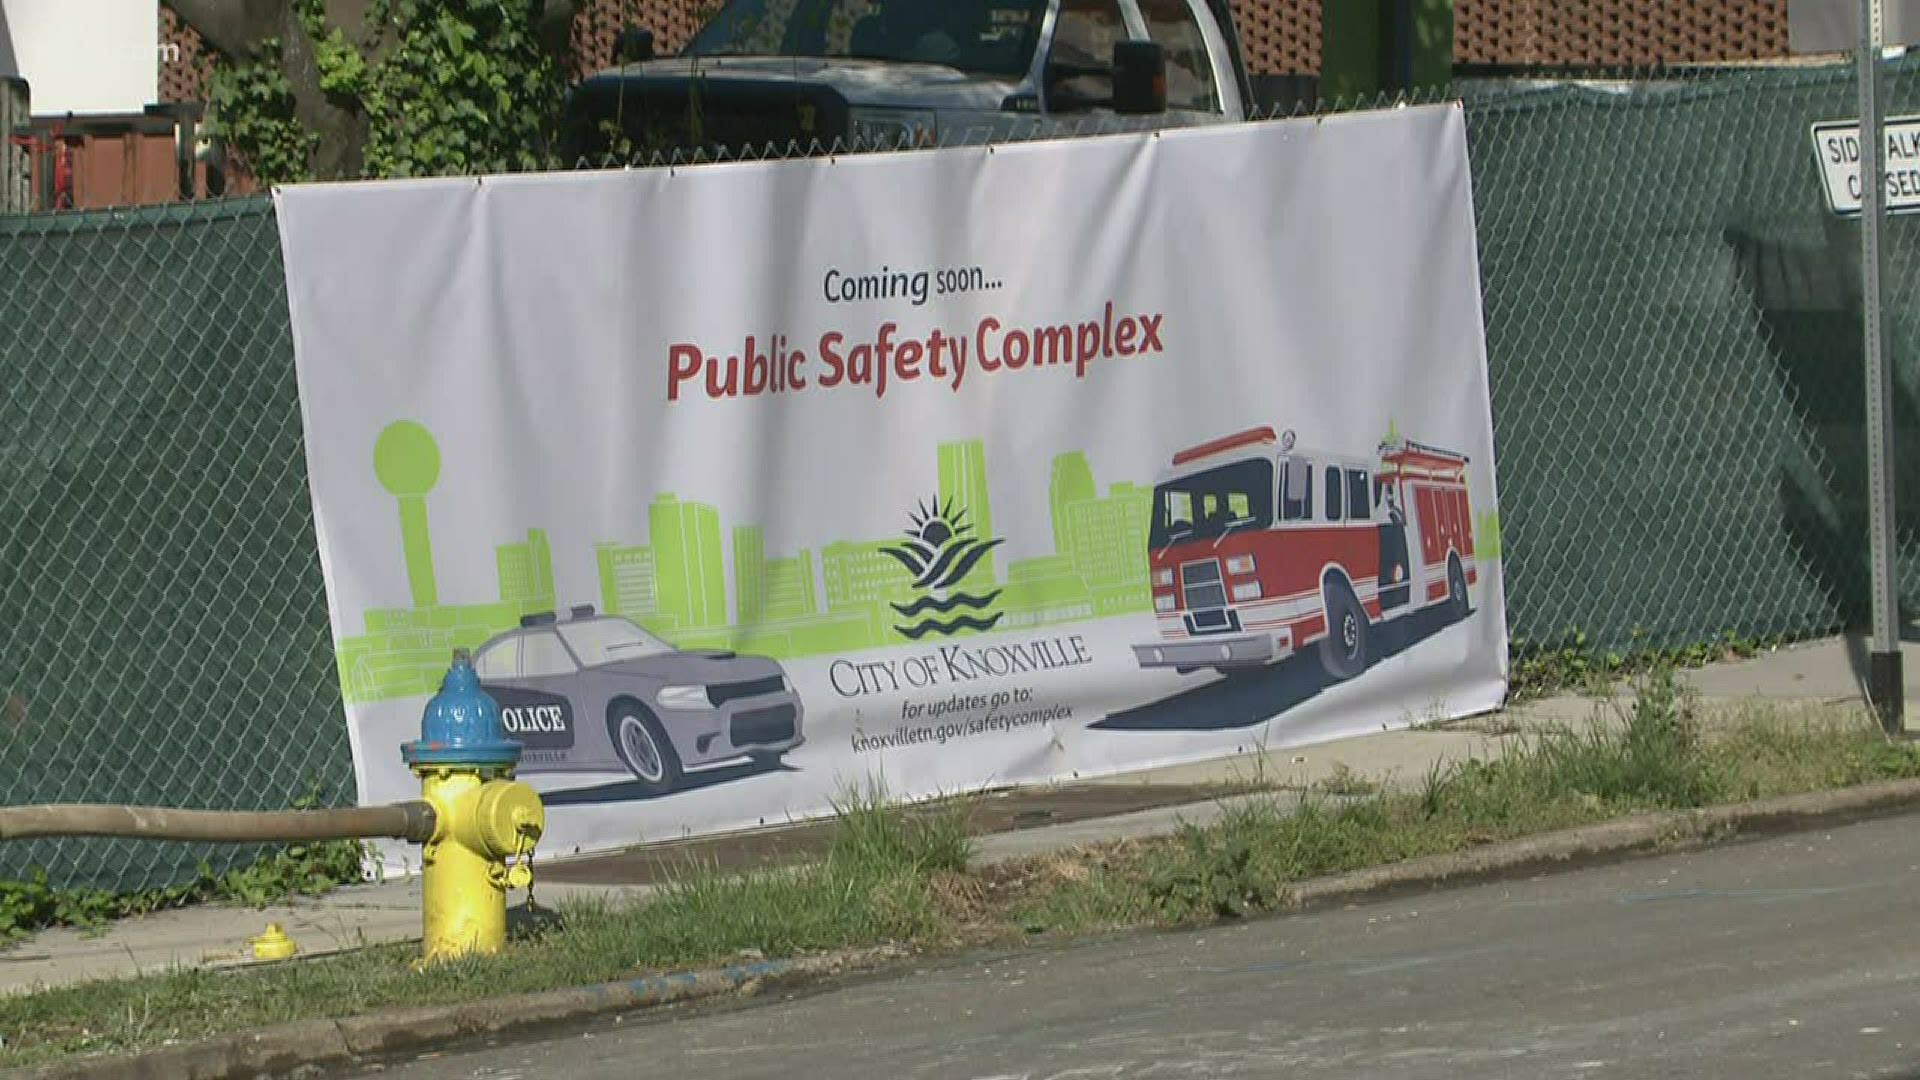 The City of Knoxville said it does not think coronavirus will impact the construction of a new police and fire department headquarters in North Knoxville.